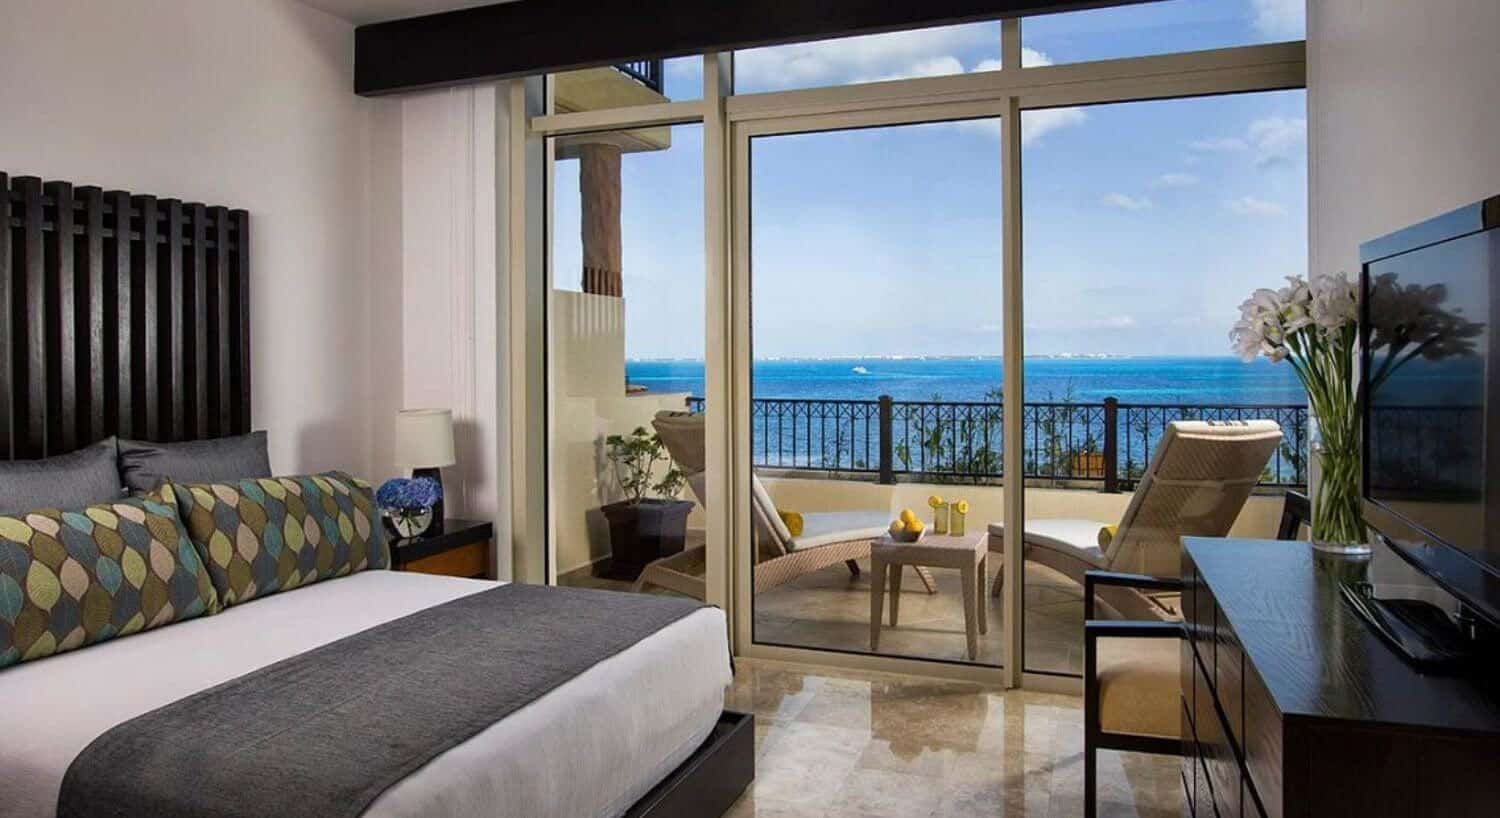 A bedroom with a king bed with white, brown and multi colored bedding, a dresser with flat screen TV on top, an armchair, and sliding doors opening up to a private balcony with lounge chairs, small table with drinks and fruit, and views of the turquoise Caribbean ocean.